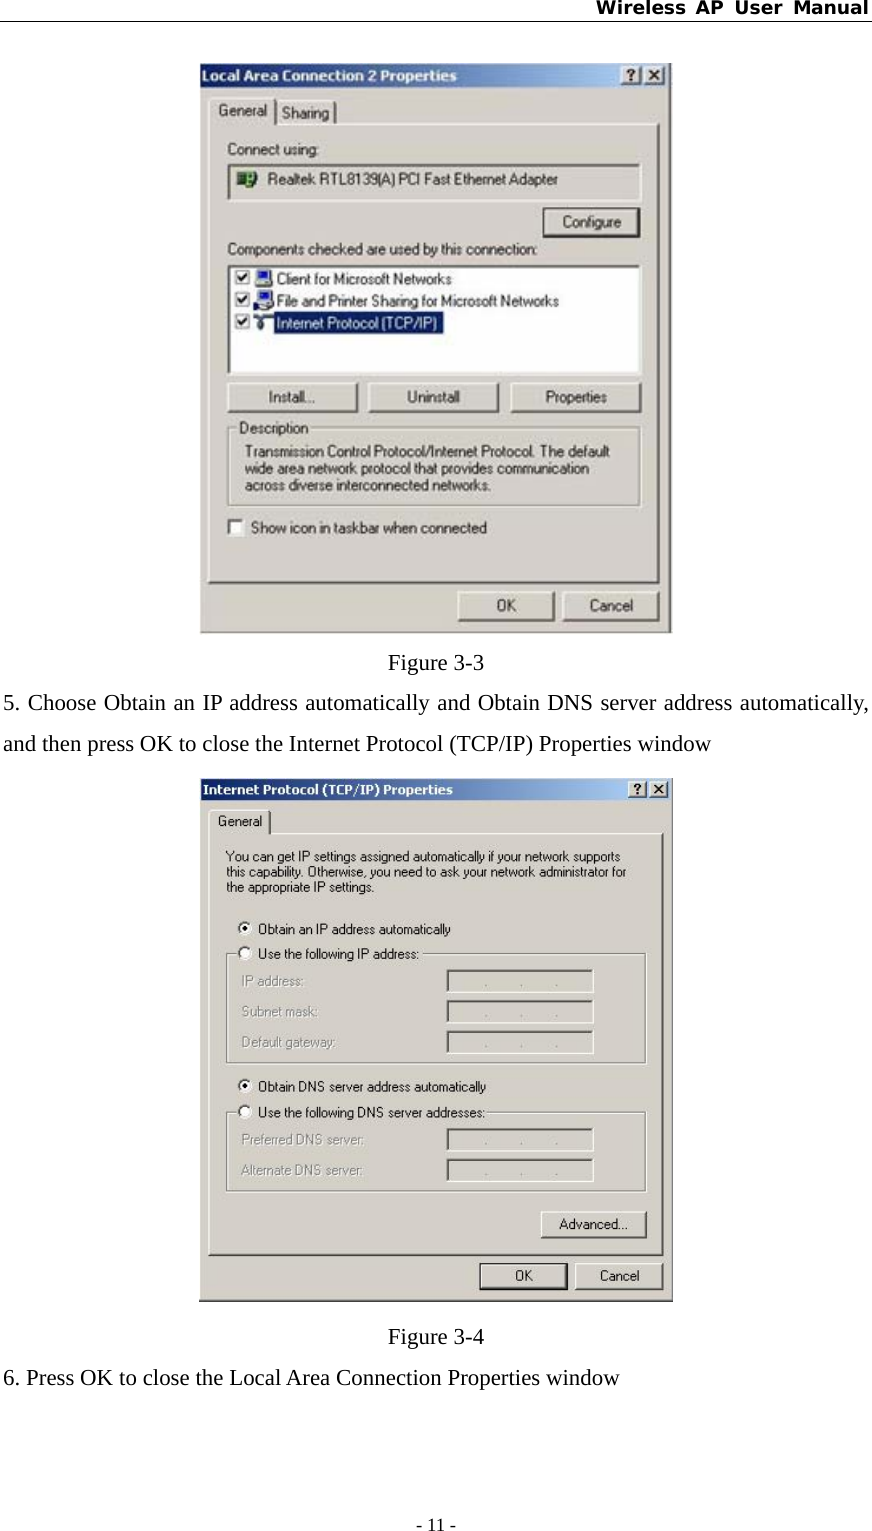 Wireless AP User Manual - 11 -   Figure 3-3 5. Choose Obtain an IP address automatically and Obtain DNS server address automatically, and then press OK to close the Internet Protocol (TCP/IP) Properties window  Figure 3-4 6. Press OK to close the Local Area Connection Properties window 